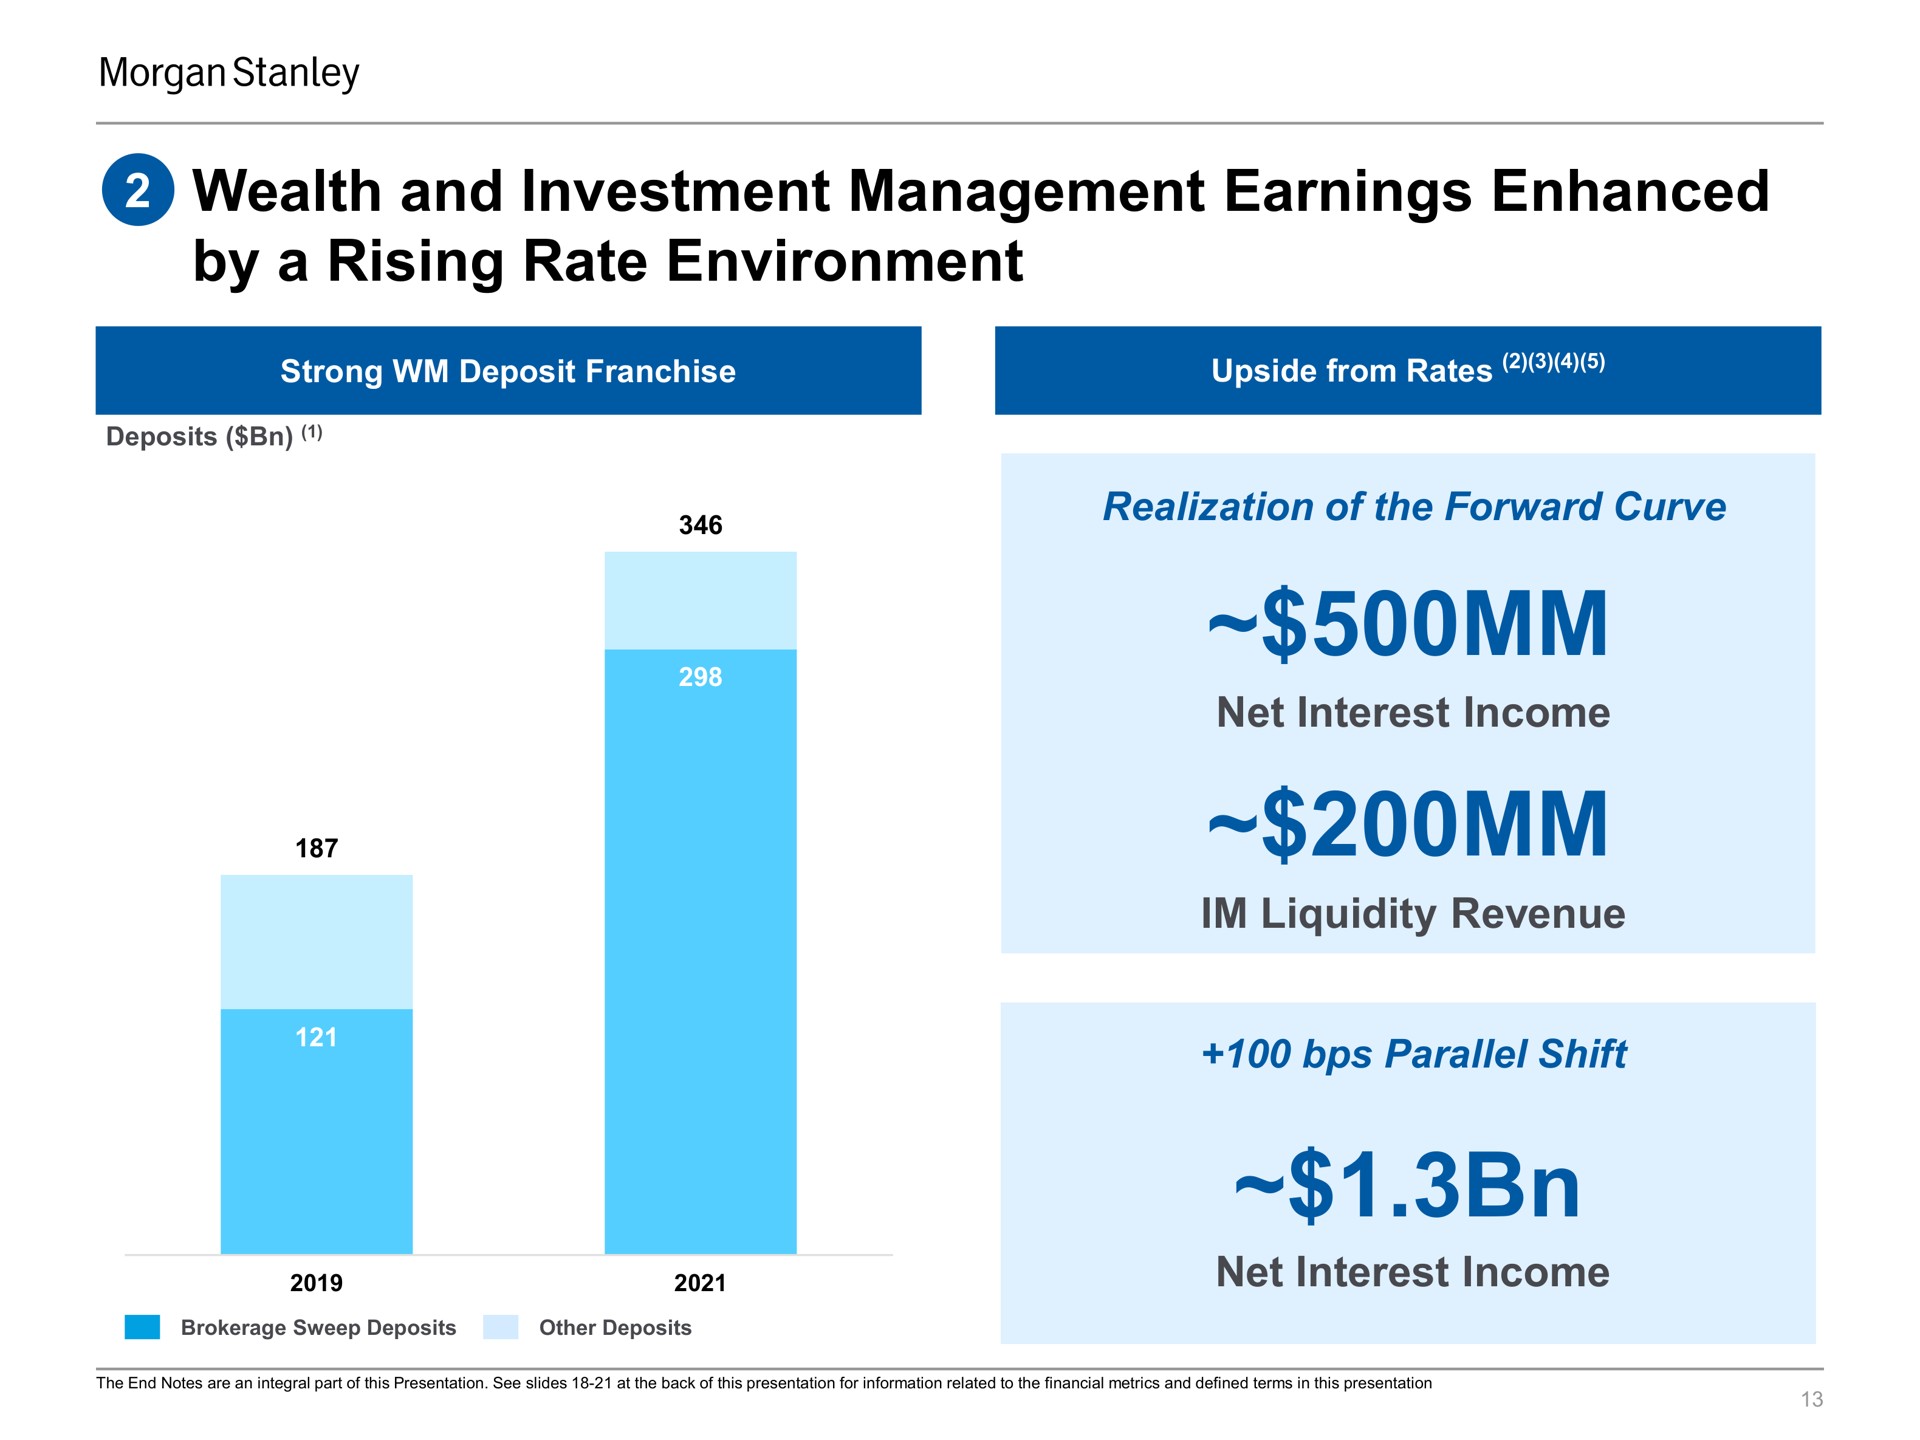 wealth and investment management earnings enhanced by a rising rate environment realization of the forward curve net interest income liquidity revenue parallel shift net interest income | Morgan Stanley